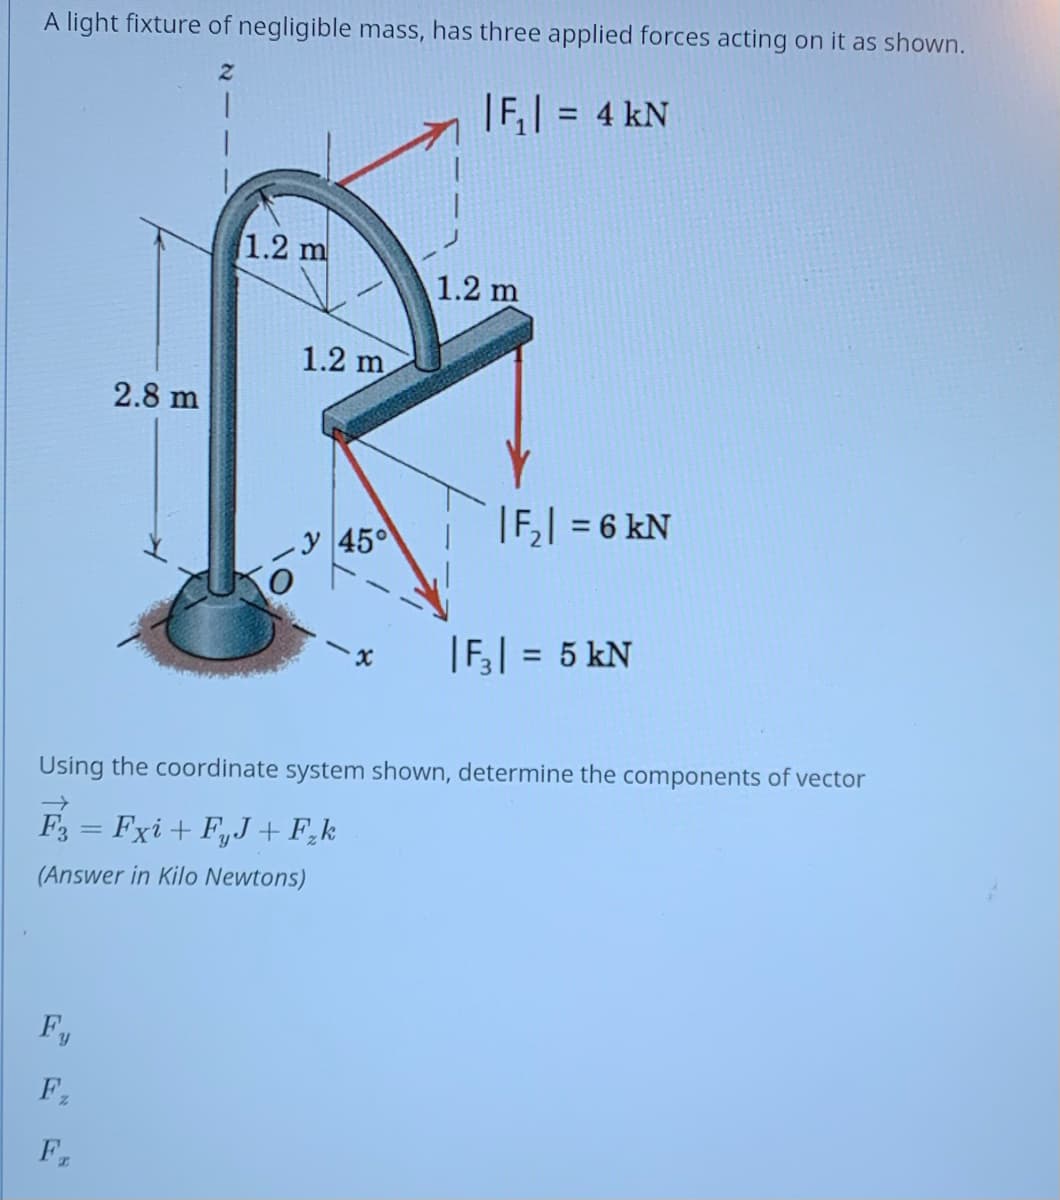 A light fixture of negligible mass, has three applied forces acting on it as shown.
|F,| = 4 kN
%3D
1.2 m
1.2 m
1.2 m
2.8 m
|F,| = 6 kN
y 45°
|F = 5 kN
Using the coordinate system shown, determine the components of vector
F = Fxi + F,J +F,k
(Answer in Kilo Newtons)
Fy
F2
F,
